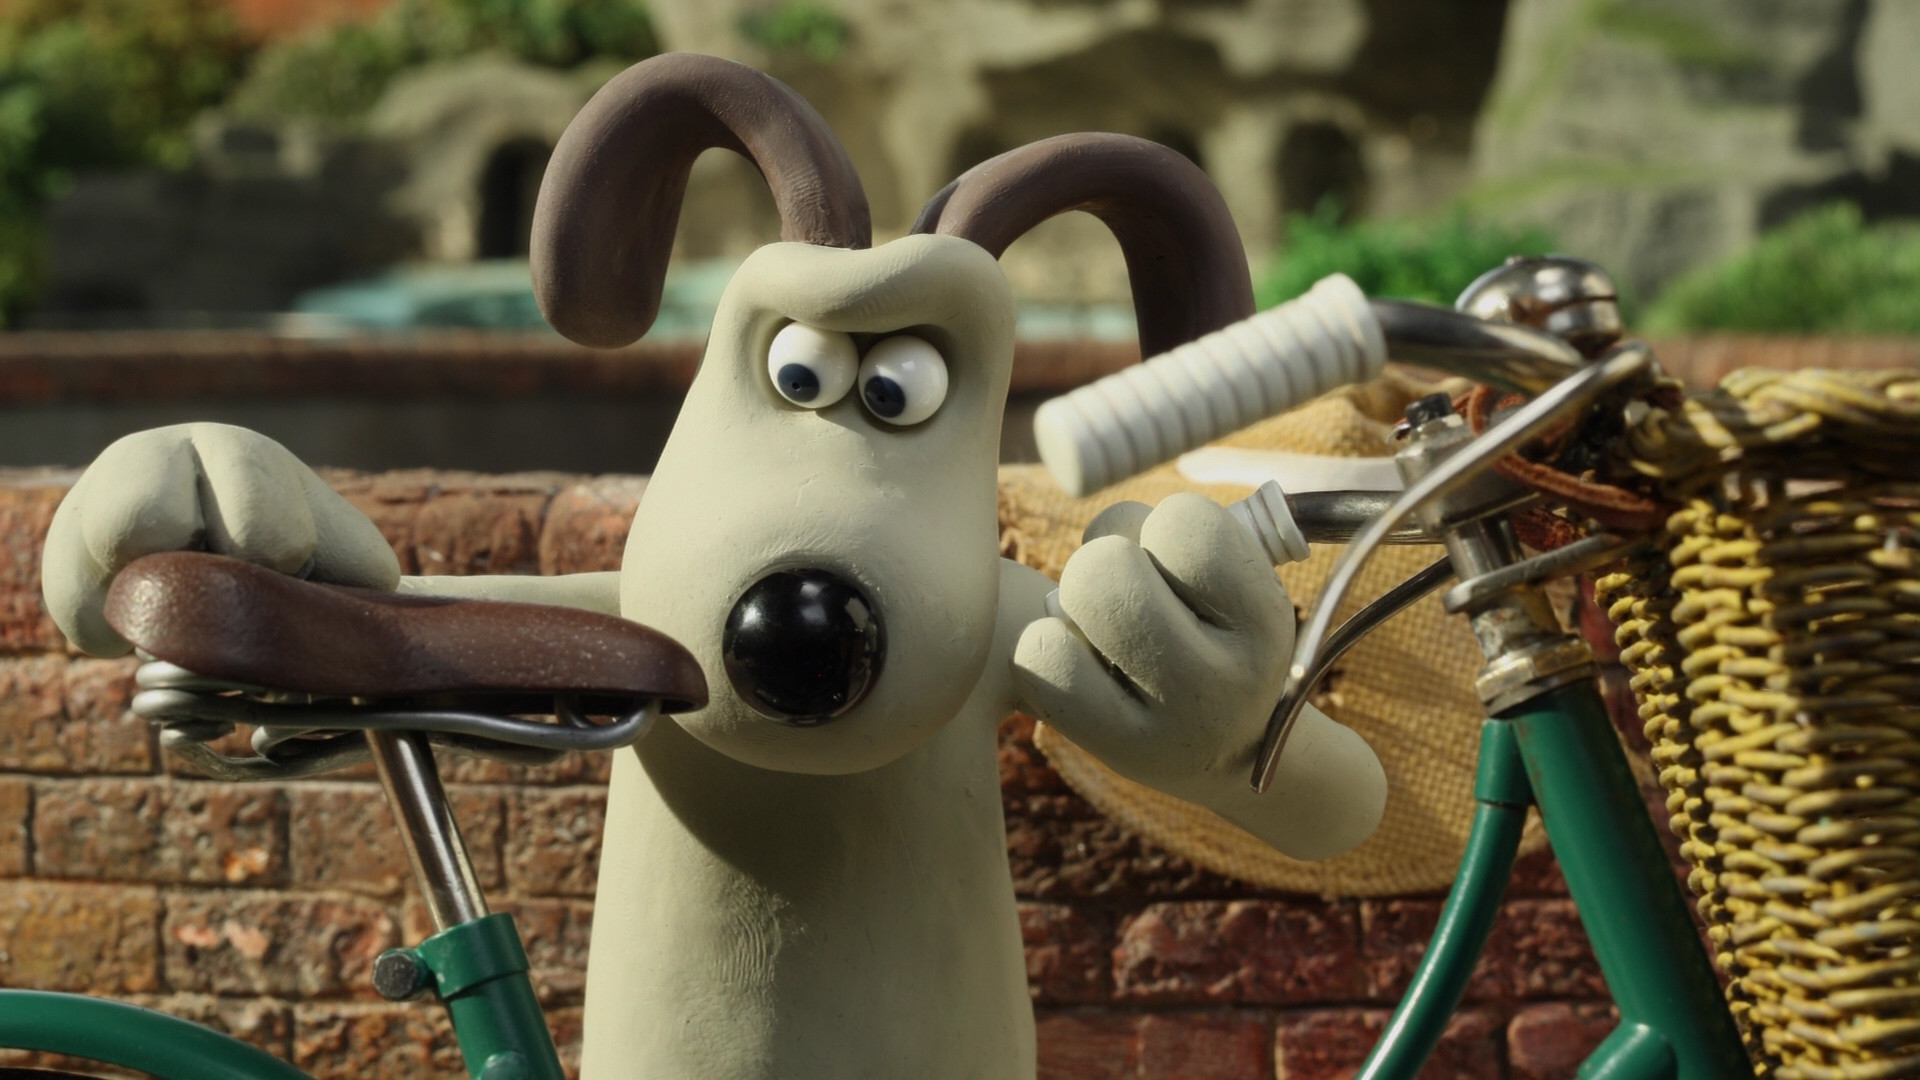 Wallace And Gromit A Matter Of Loaf And Death Movie Y Gromit Fondos De Pantalla HD Wallpaper